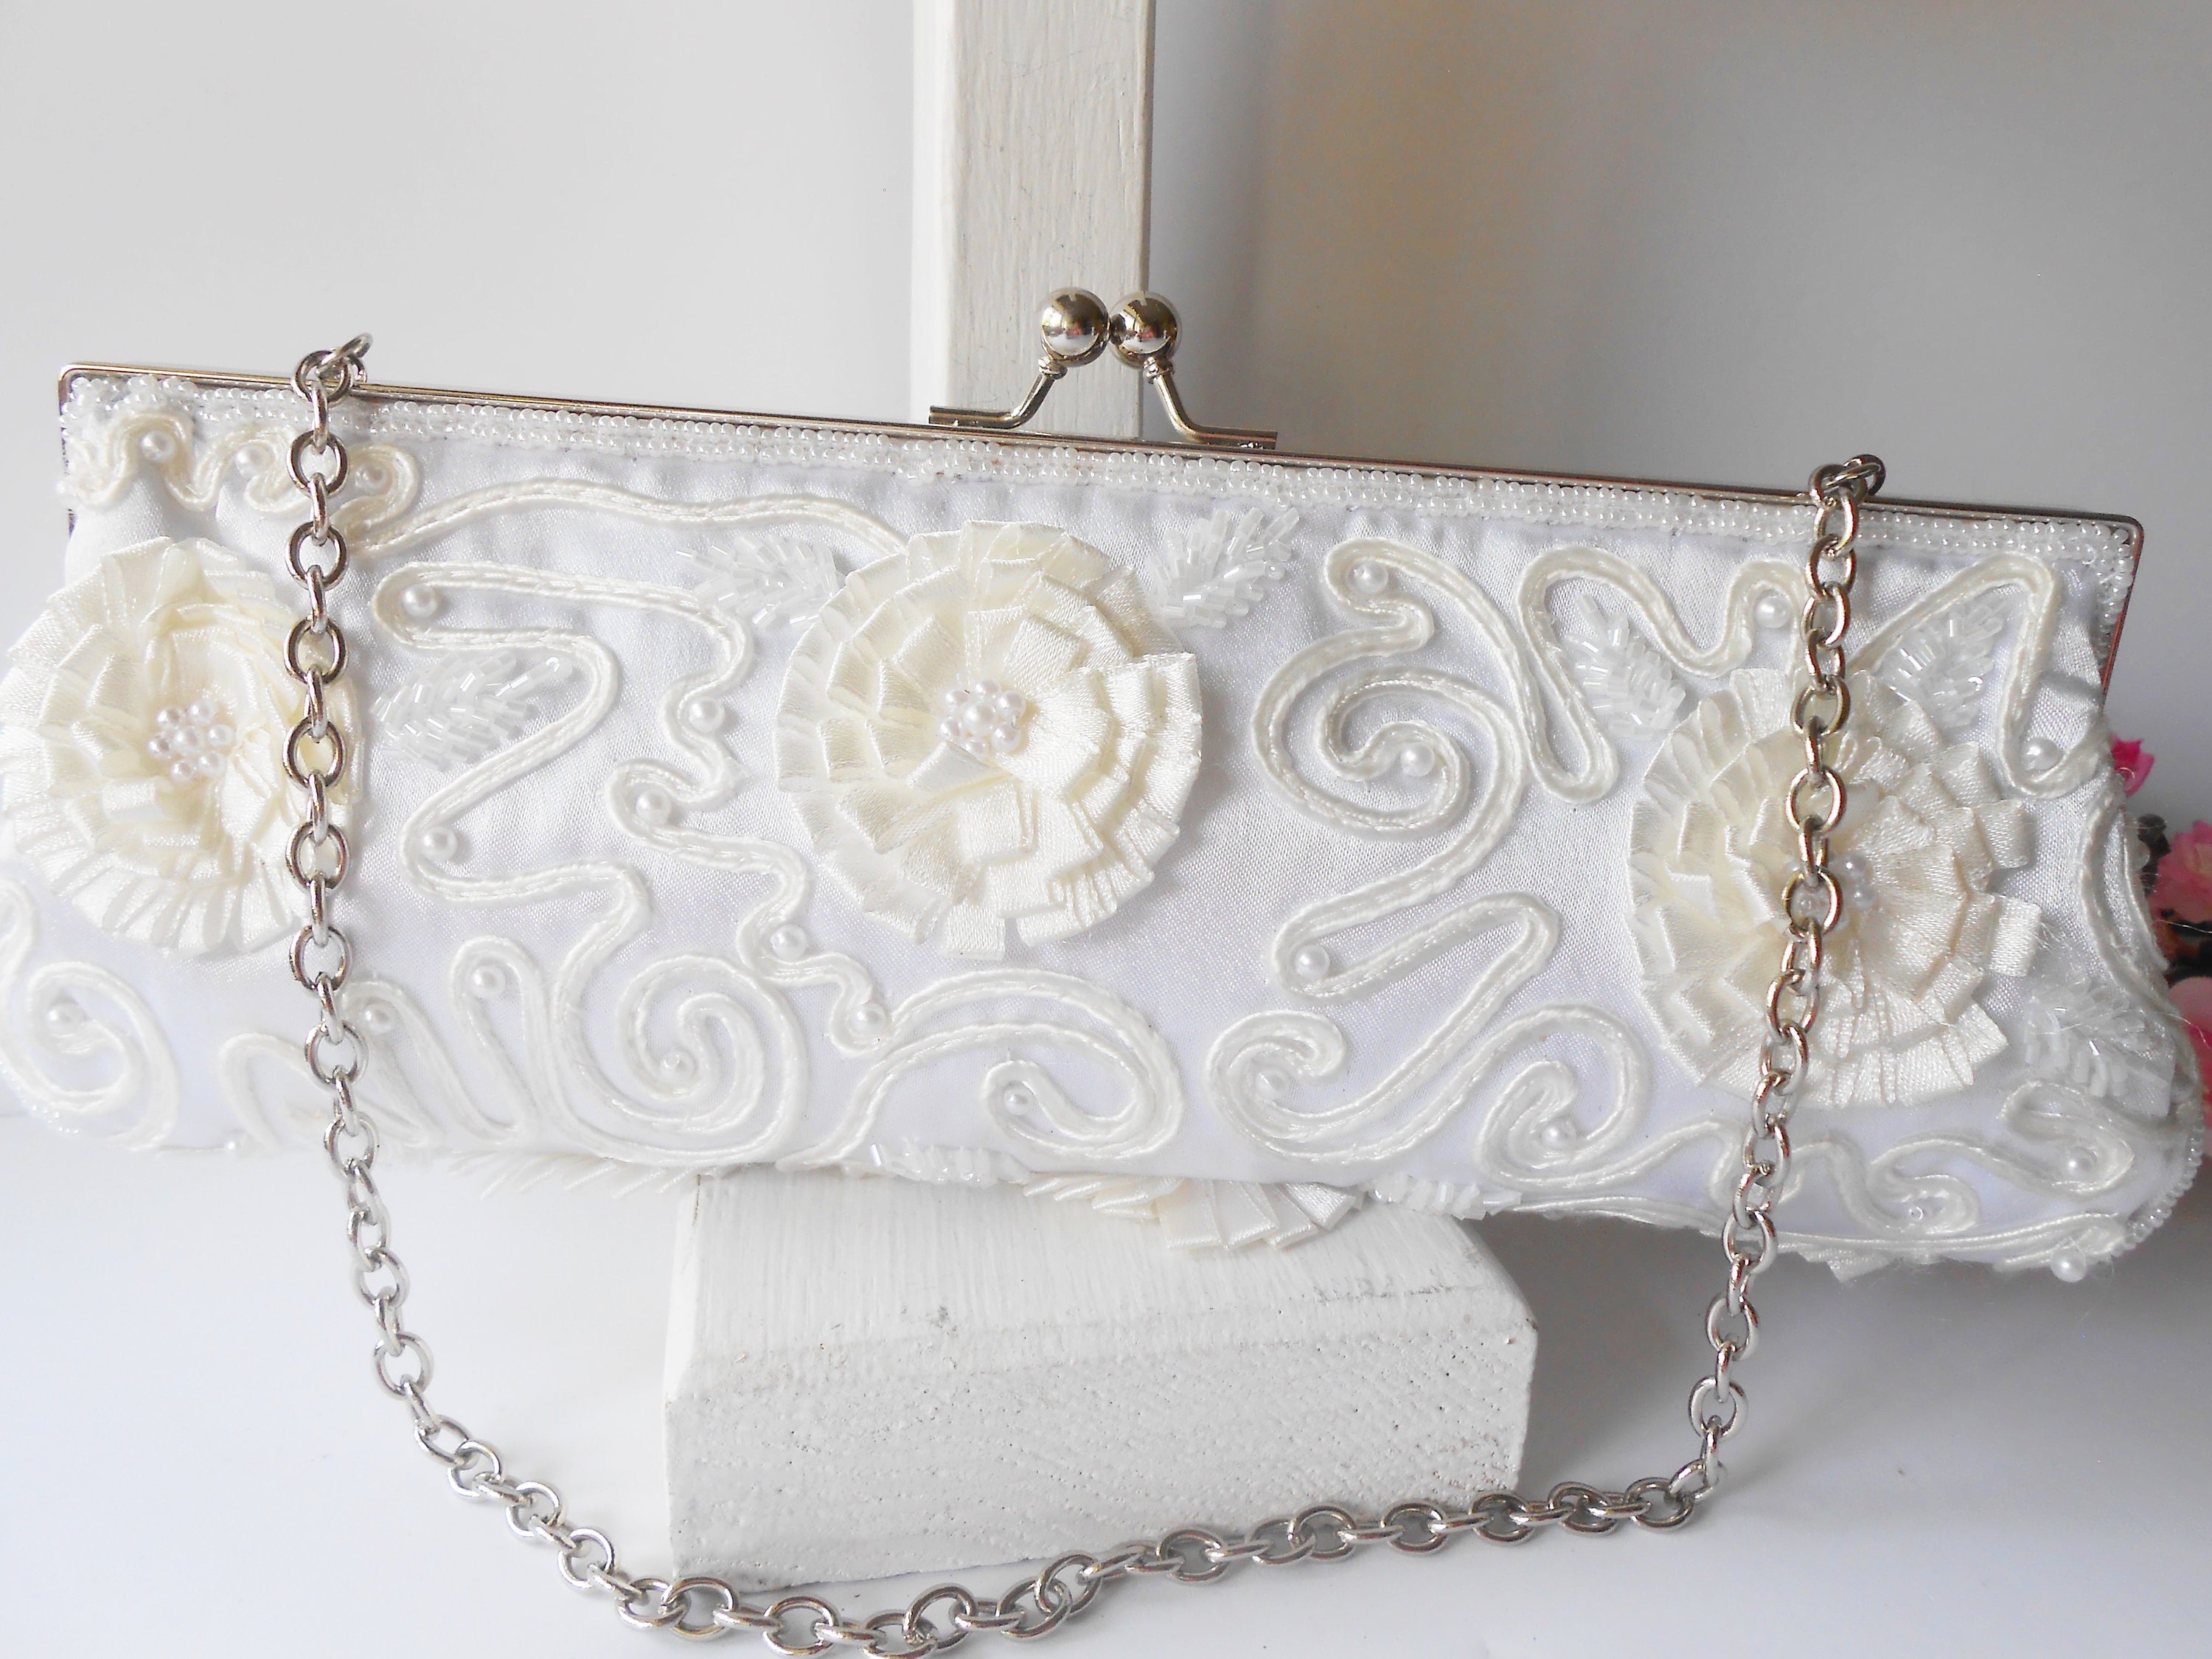 Mulian LilY Floral Ivory Wedding Clutch Bags For Women Lace Evening Clutch  Purses M815: Handbags: Amazon.com